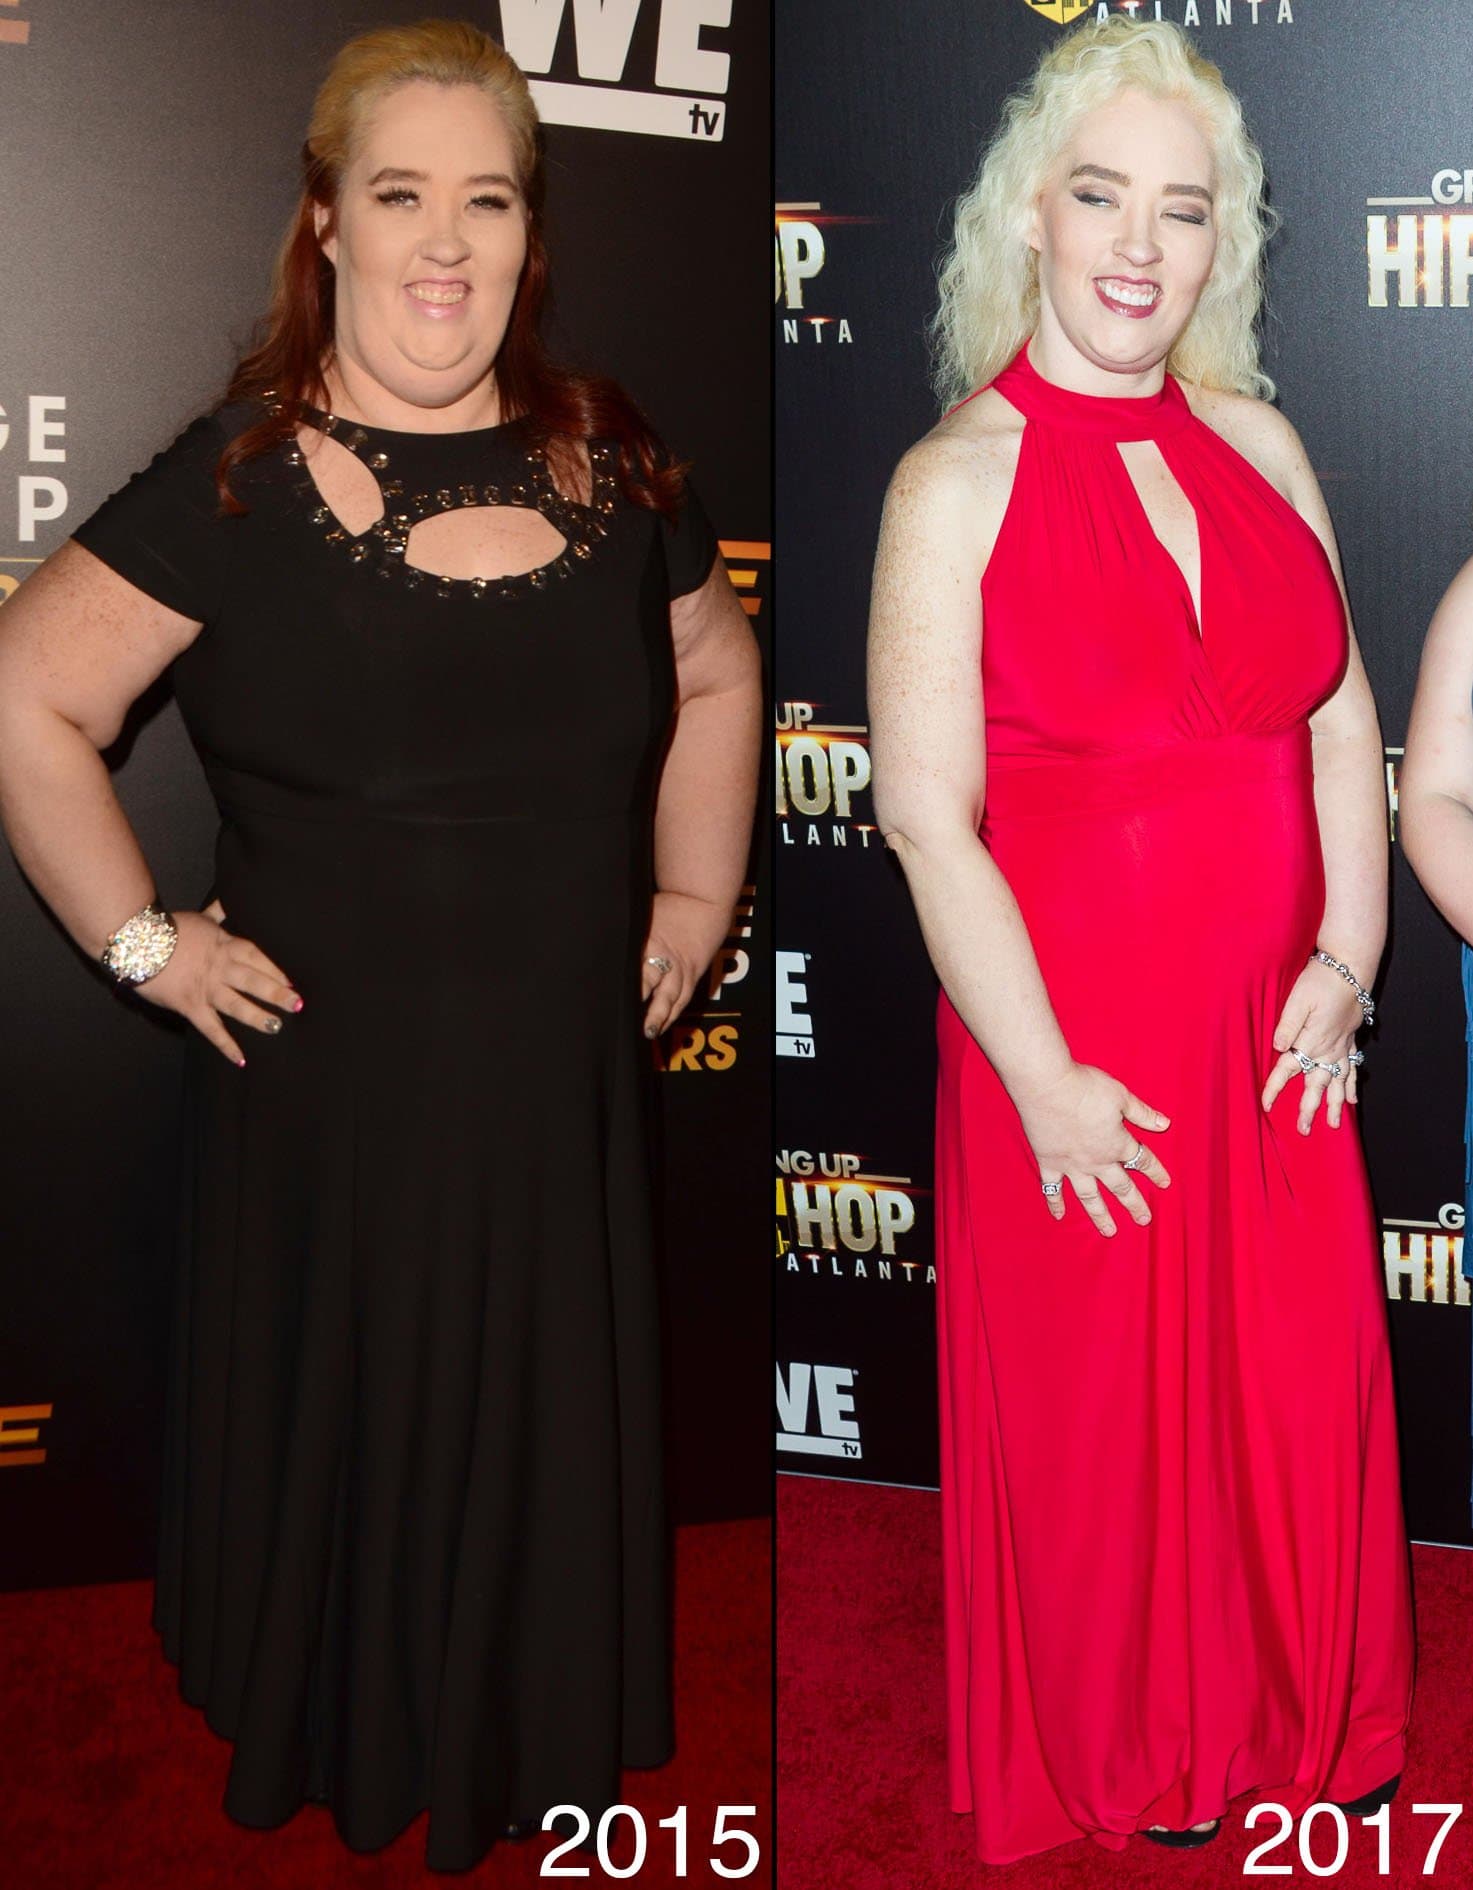 Mama June Shannon once weighed 460 pounds but lost 300 following a gastric sleeve surgery in 2016 and later a tummy tuck